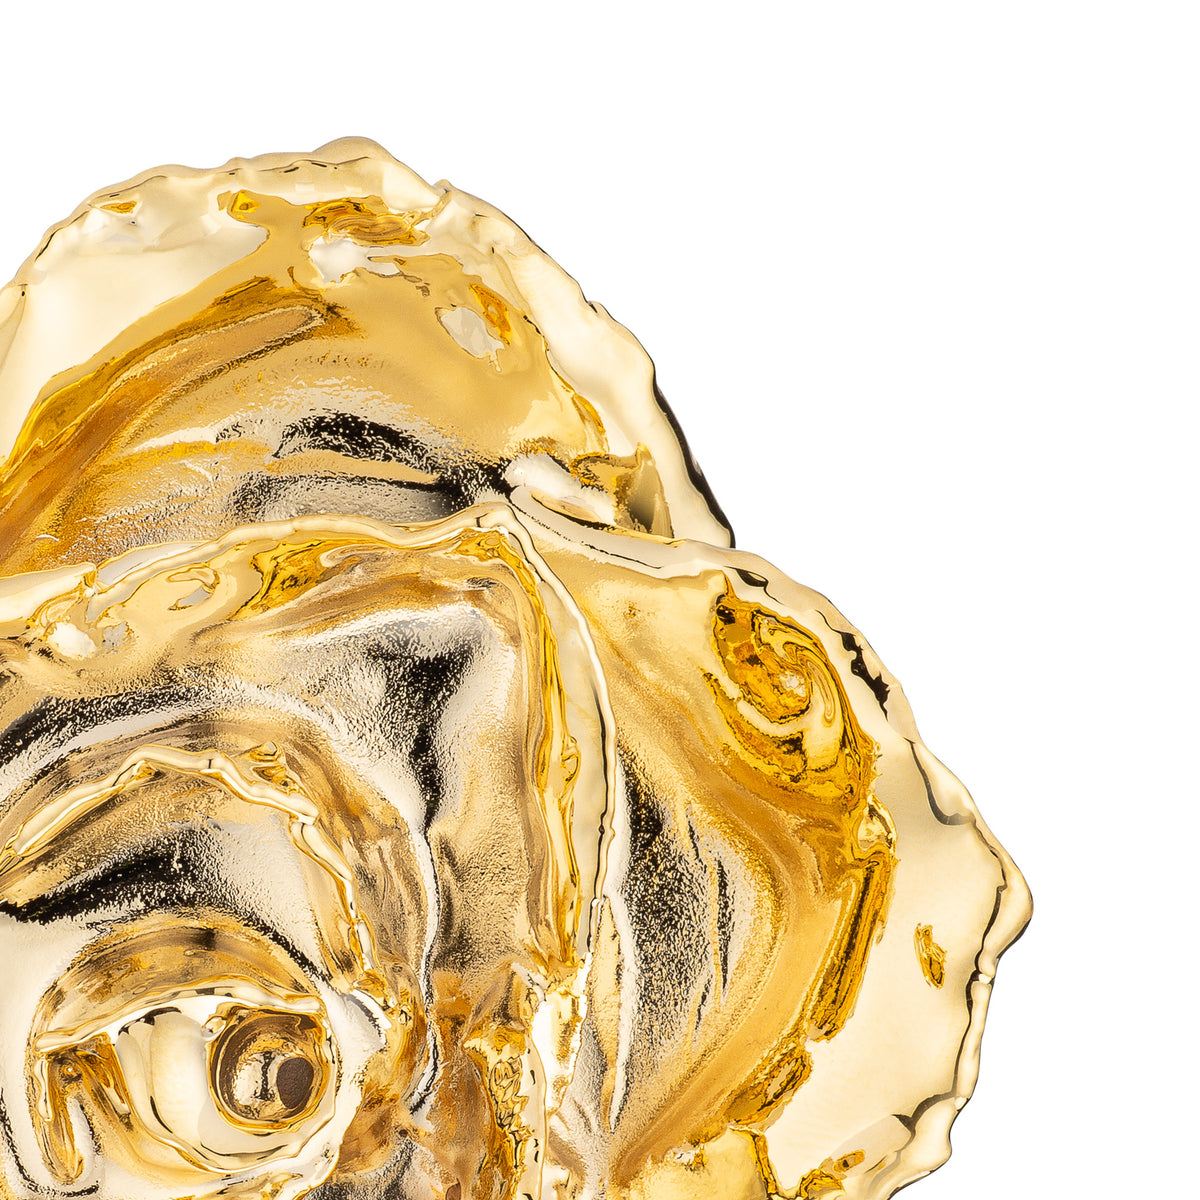 Real 24K Gold Forever Rose. Rose is fully dipped in gold. View shows the rose petals, sepals, stem, and leaves covered in 24 karat gold. This view is a close up view from the top.